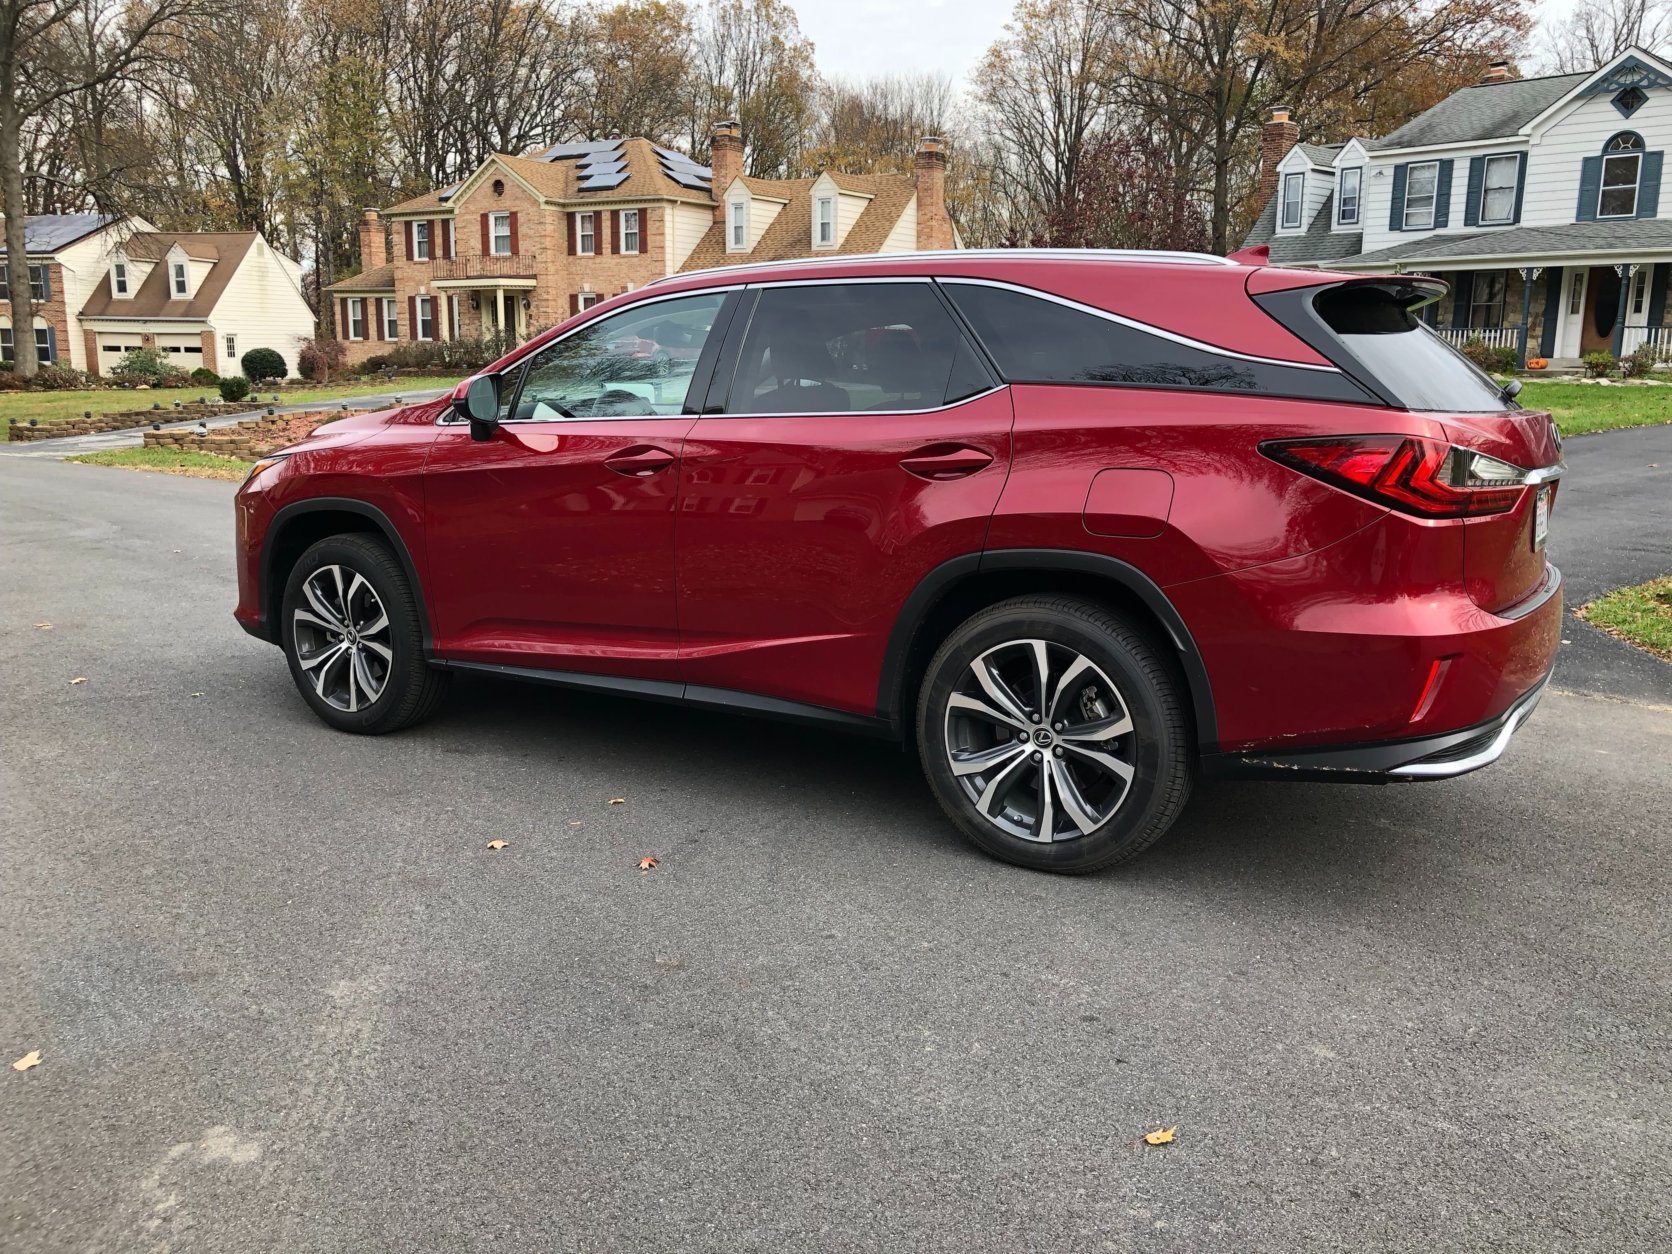 <p>Usually when you stretch a vehicle it looks odd but the RX 350L seems to buck that fate. You really have to look closely to notice that extra space behind the back doors.</p>
